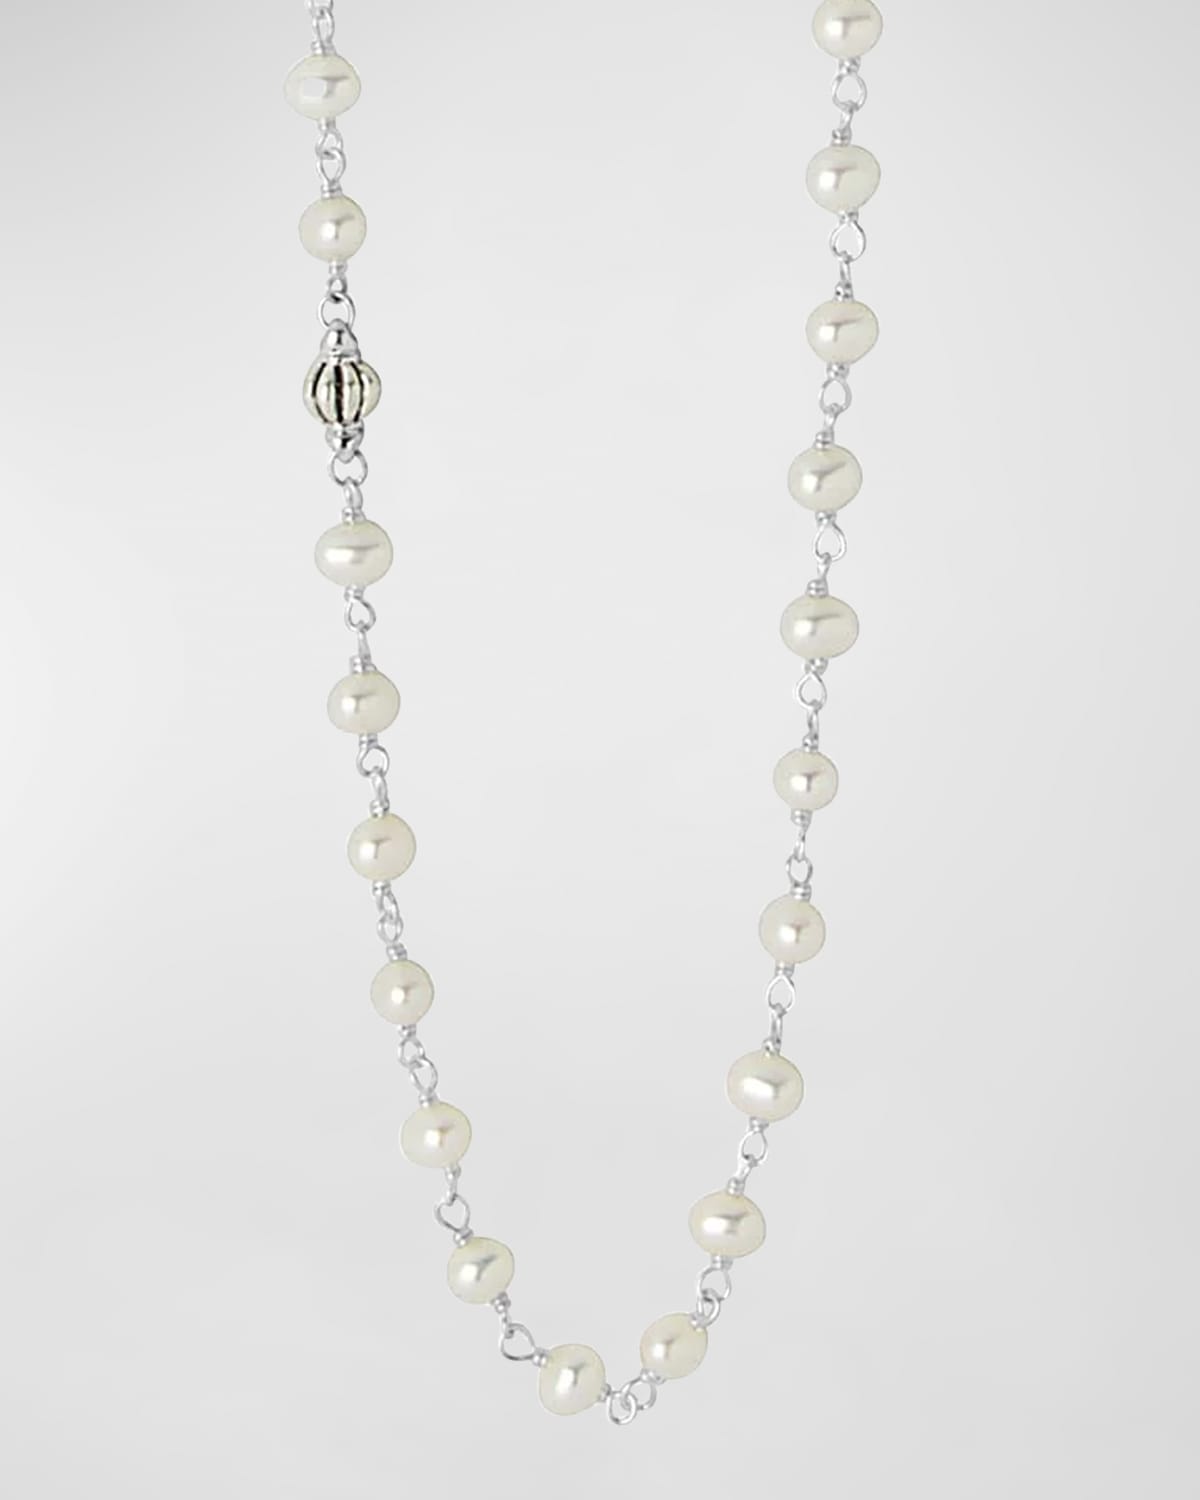 Luna Pearl Necklace with Sterling Silver, 36"